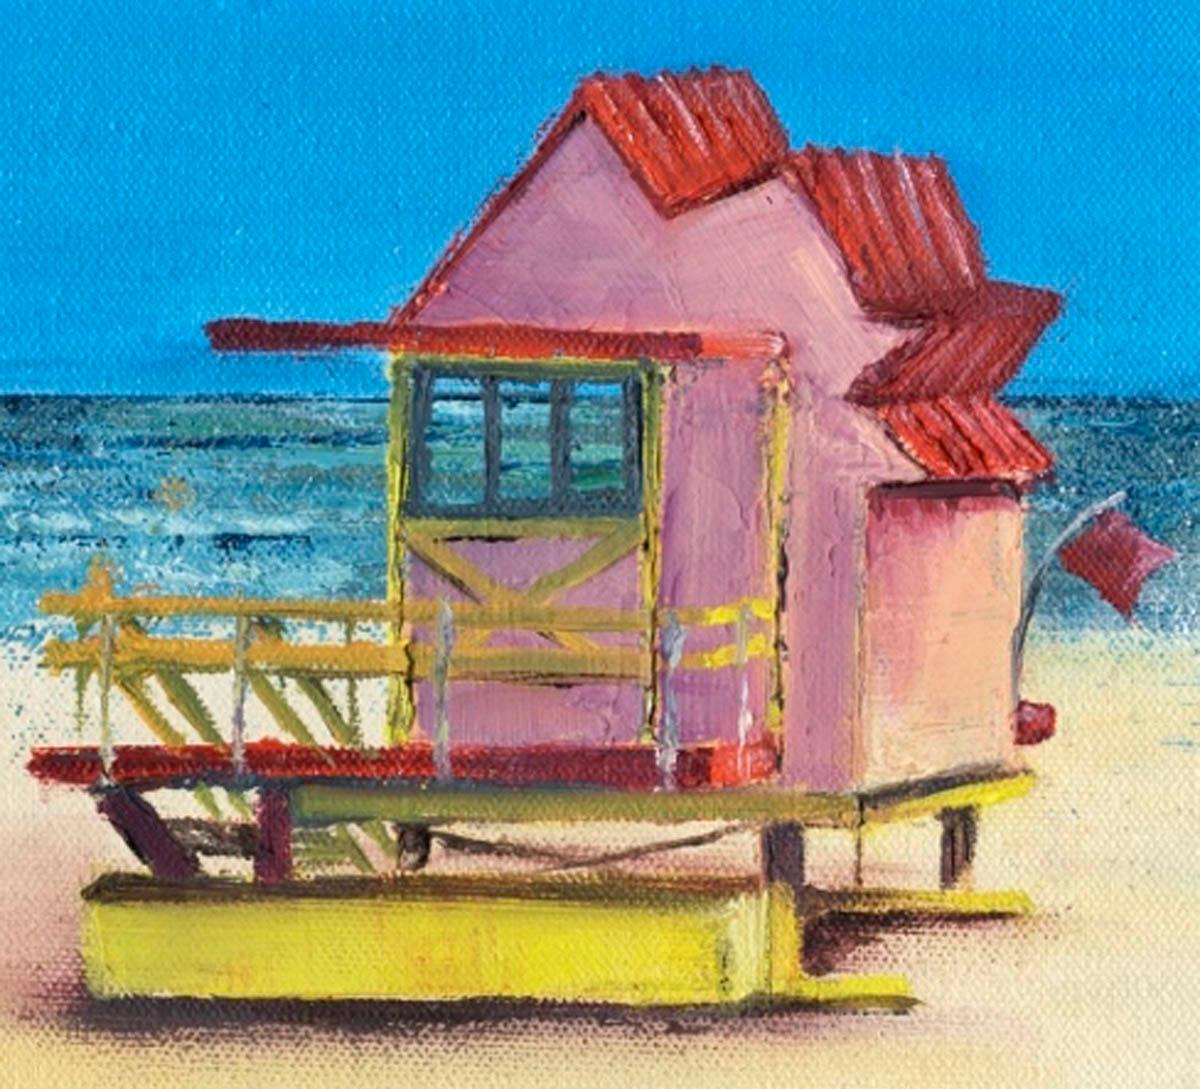 Beach Hut – Pink BY JANETTE GEORGE, Seaside Art for Sale, Affordable OriginalArt - Blue Landscape Painting by Janette George